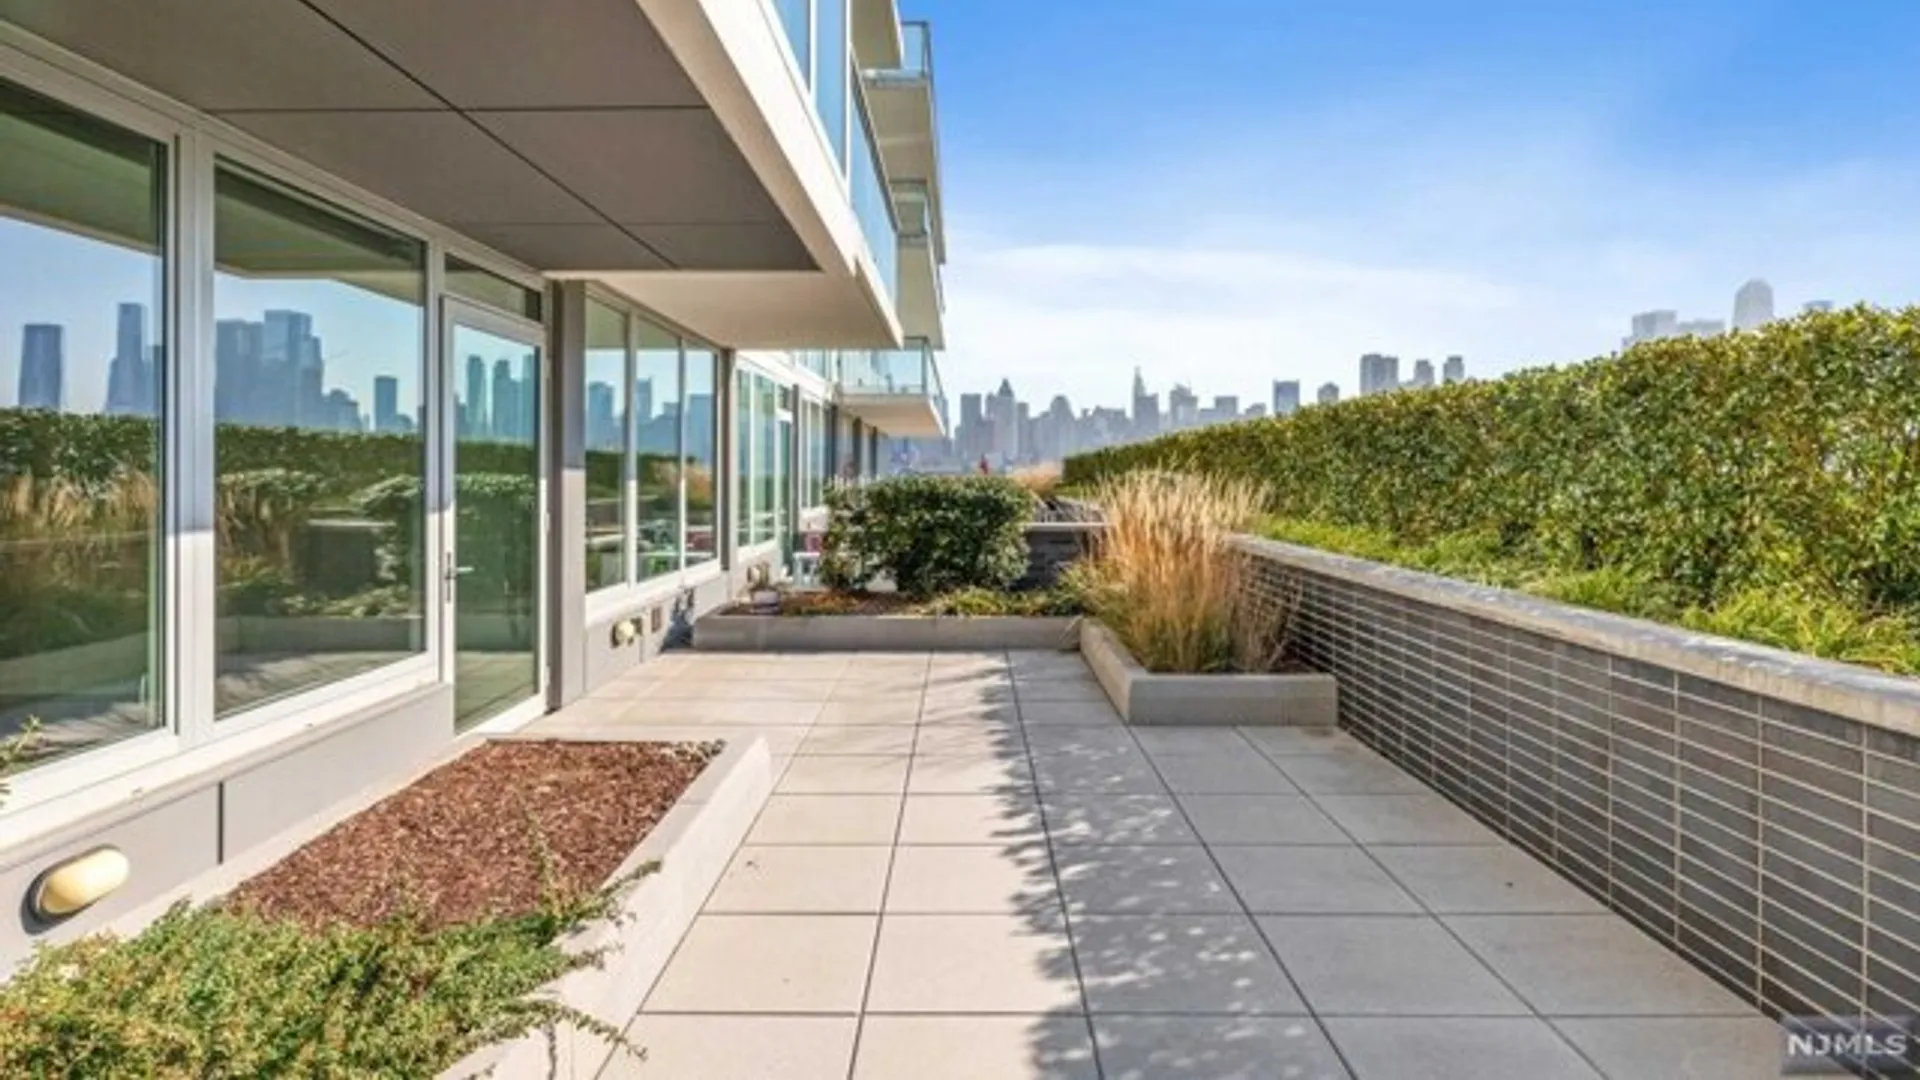 The Avenue Collection - 1000 Avenue, Hudson River Waterfront Walkway, Weehawken, NJ 07086, USA | 2 bed condo for rent